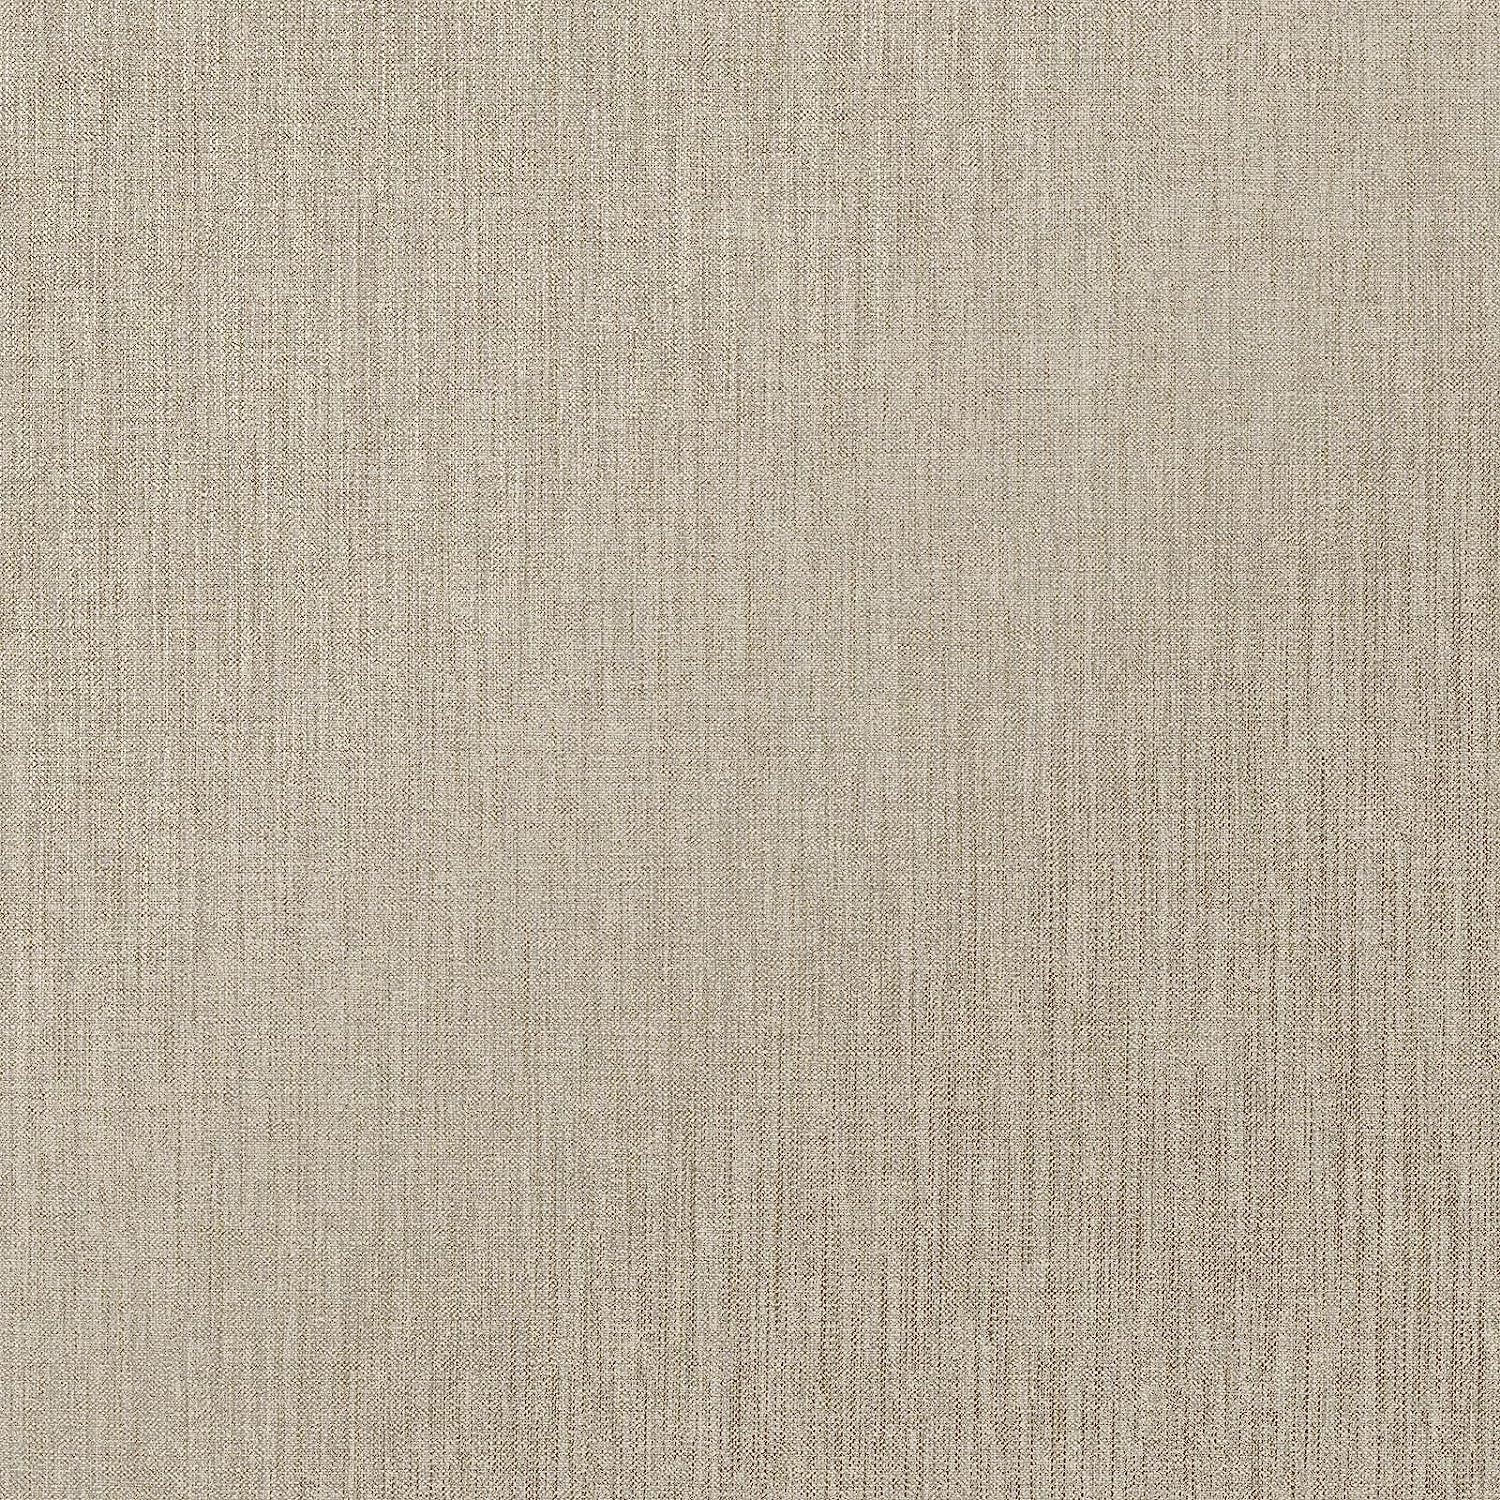 RASCH (U.K) Limited Amara Linen Wallpaper - Modern Wallpaper for Living Room, Bedroom, Fireplace - Decorative Luxury Wall Paper with Realistic Textile Thread Effect & Subtle Gold Glimmer (Beige)